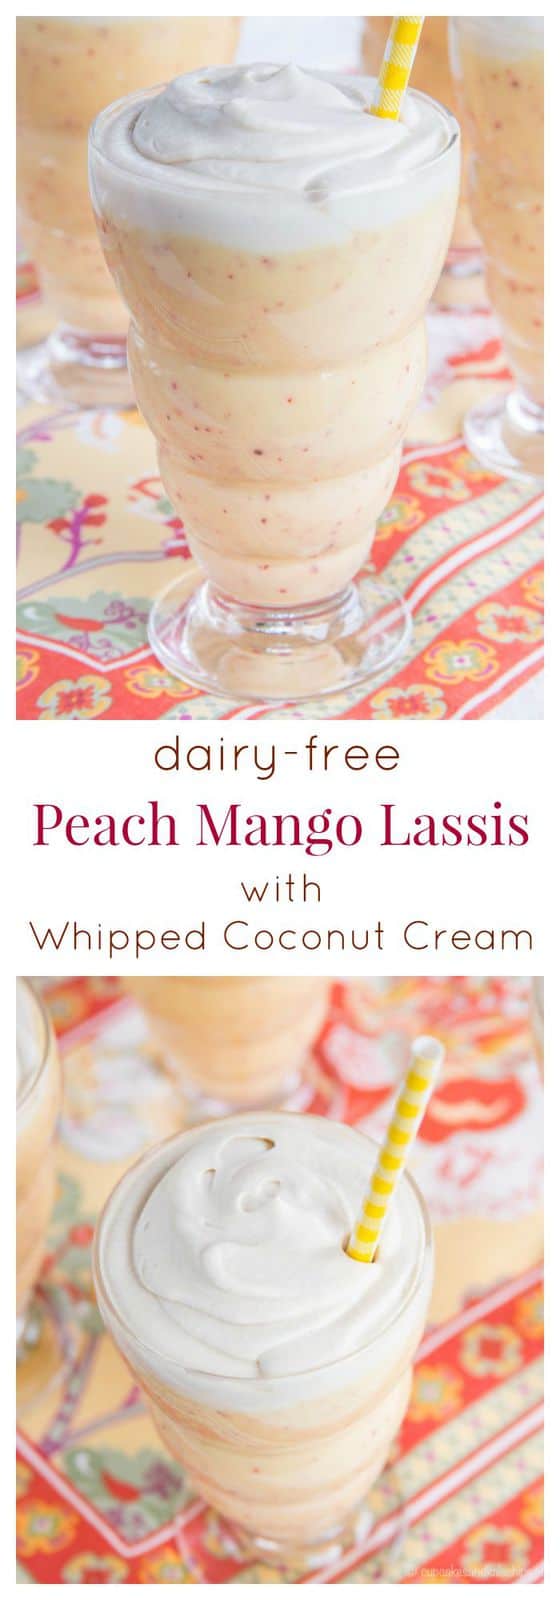 Dairy-Free Peach Mango Lassis with Whipped Coconut Cream - add some fresh peaches to the traditional Indian drink for a cool, creamy, and healthy snack or dessert! | cupcakesandkalechips.com | gluten free, paleo, vegan recipe